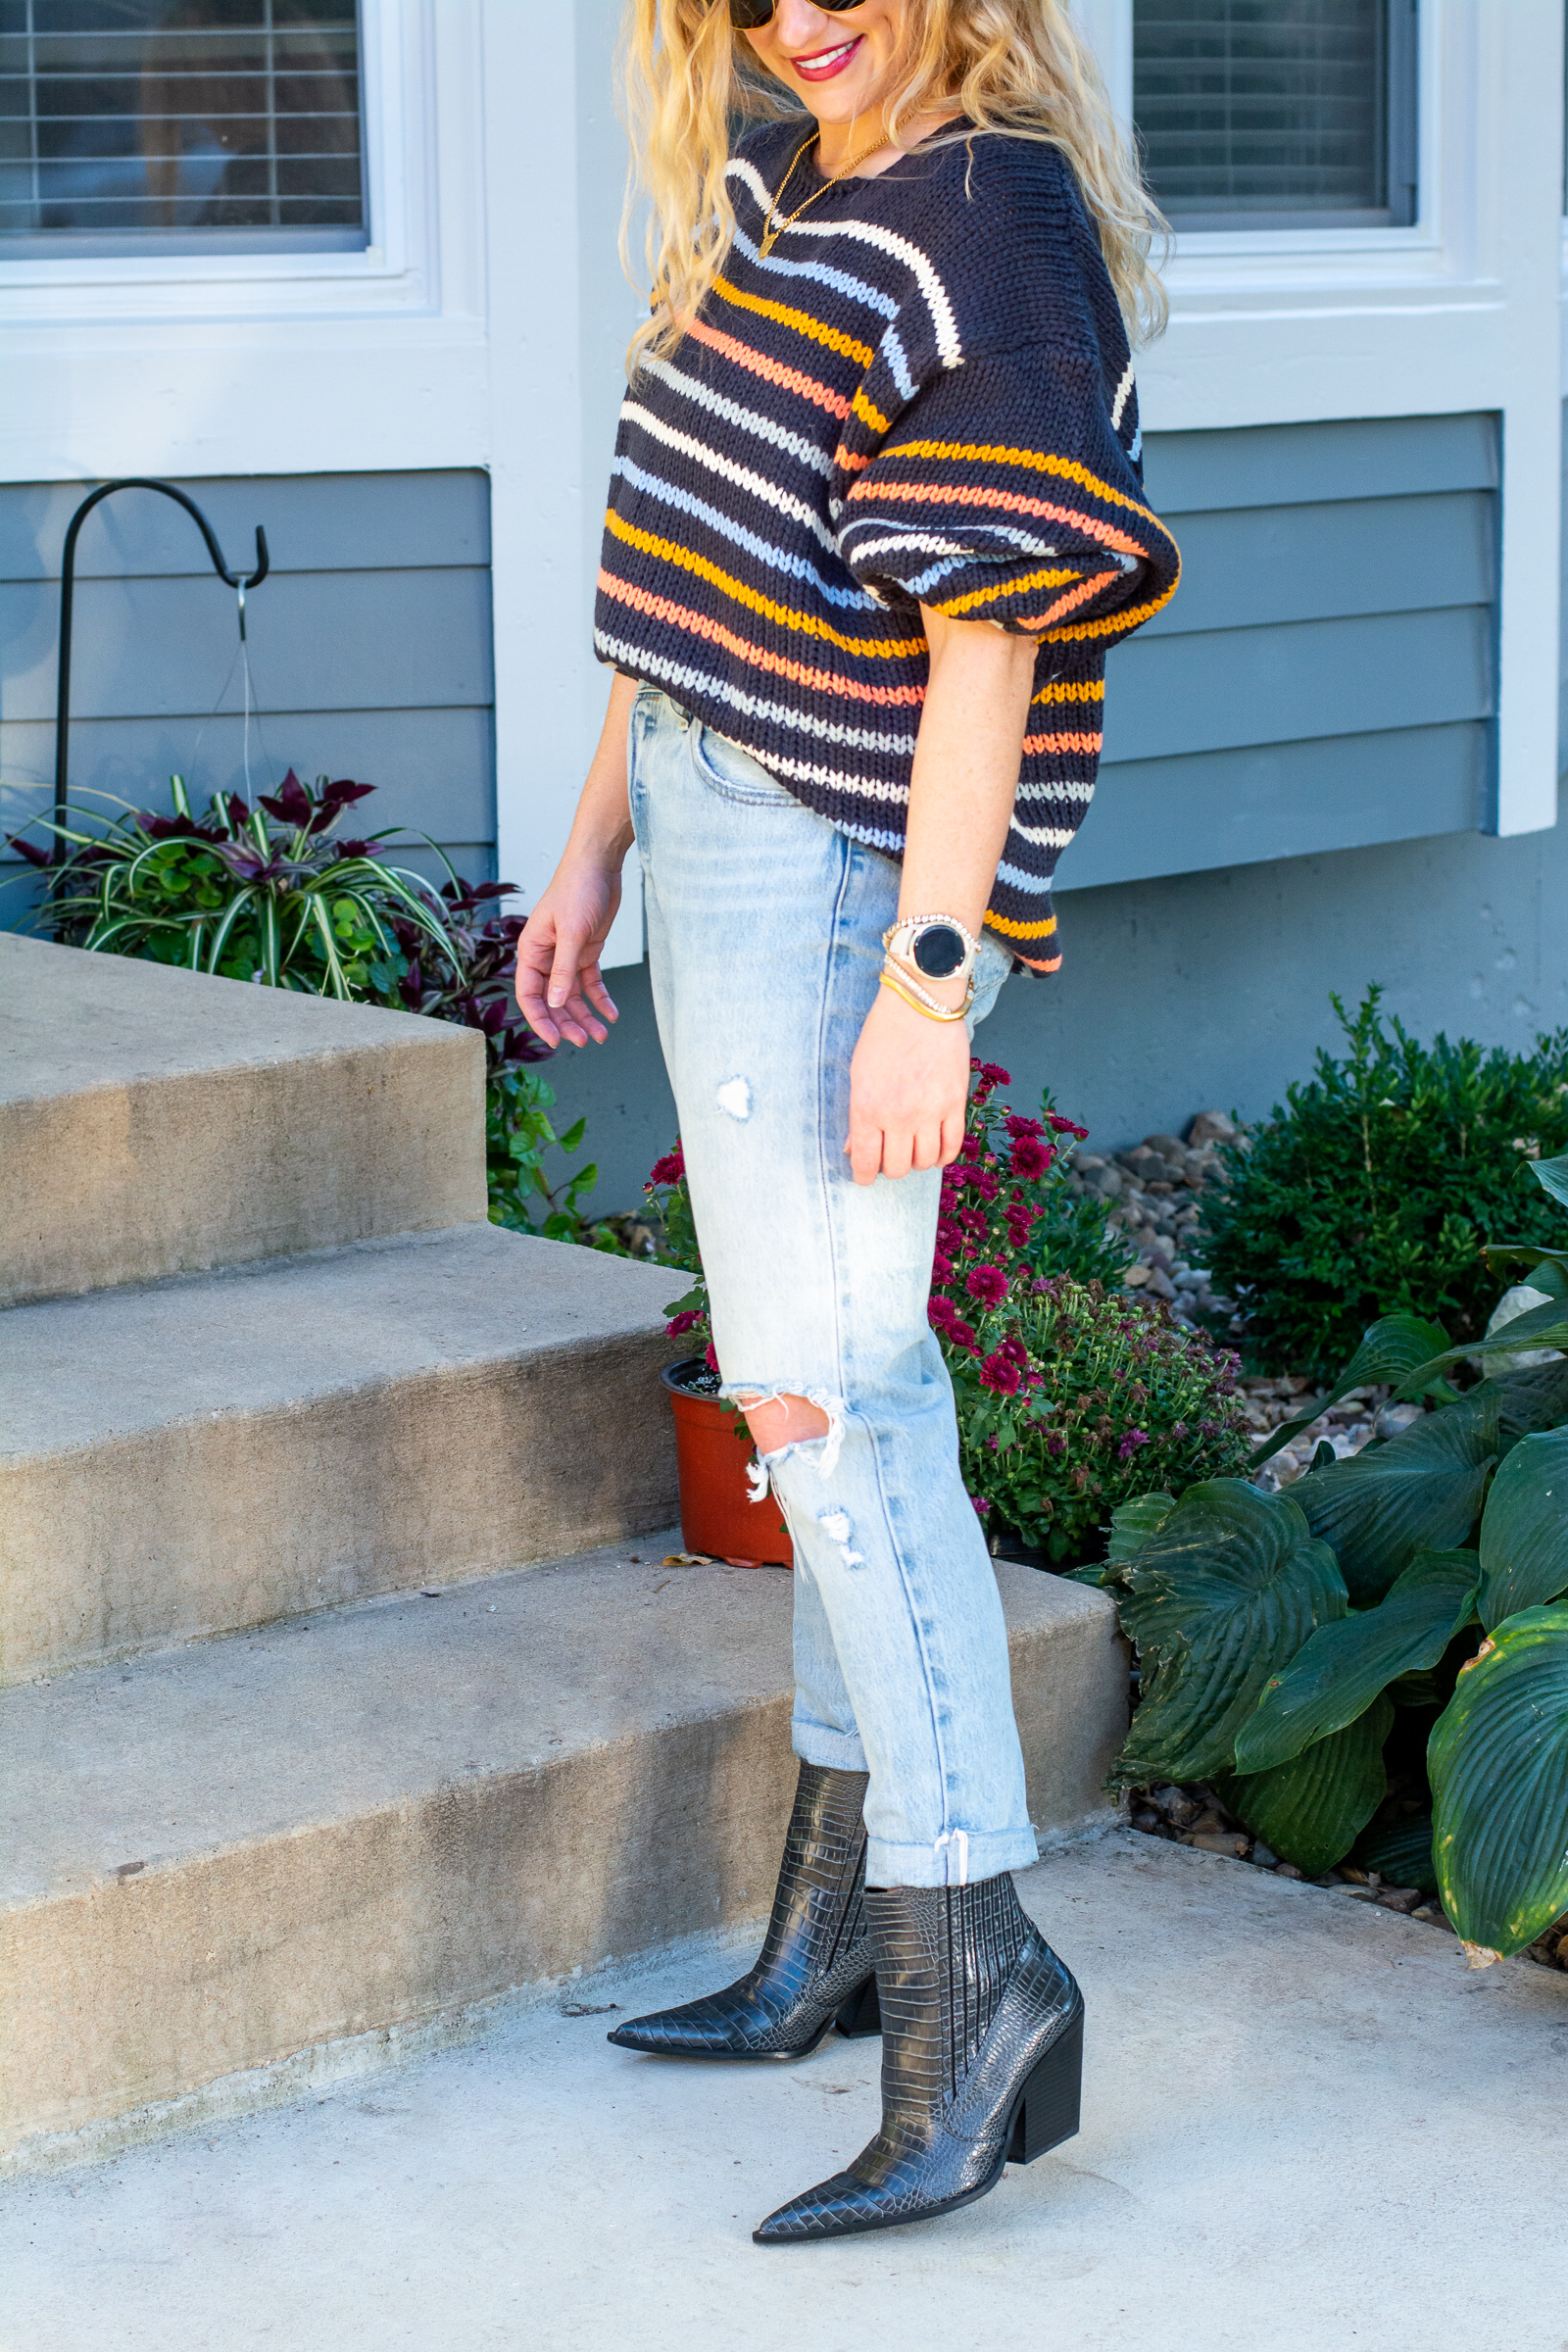 Fall Outfit Idea: Slouchy Striped Sweater + Croc Boots. | LSR